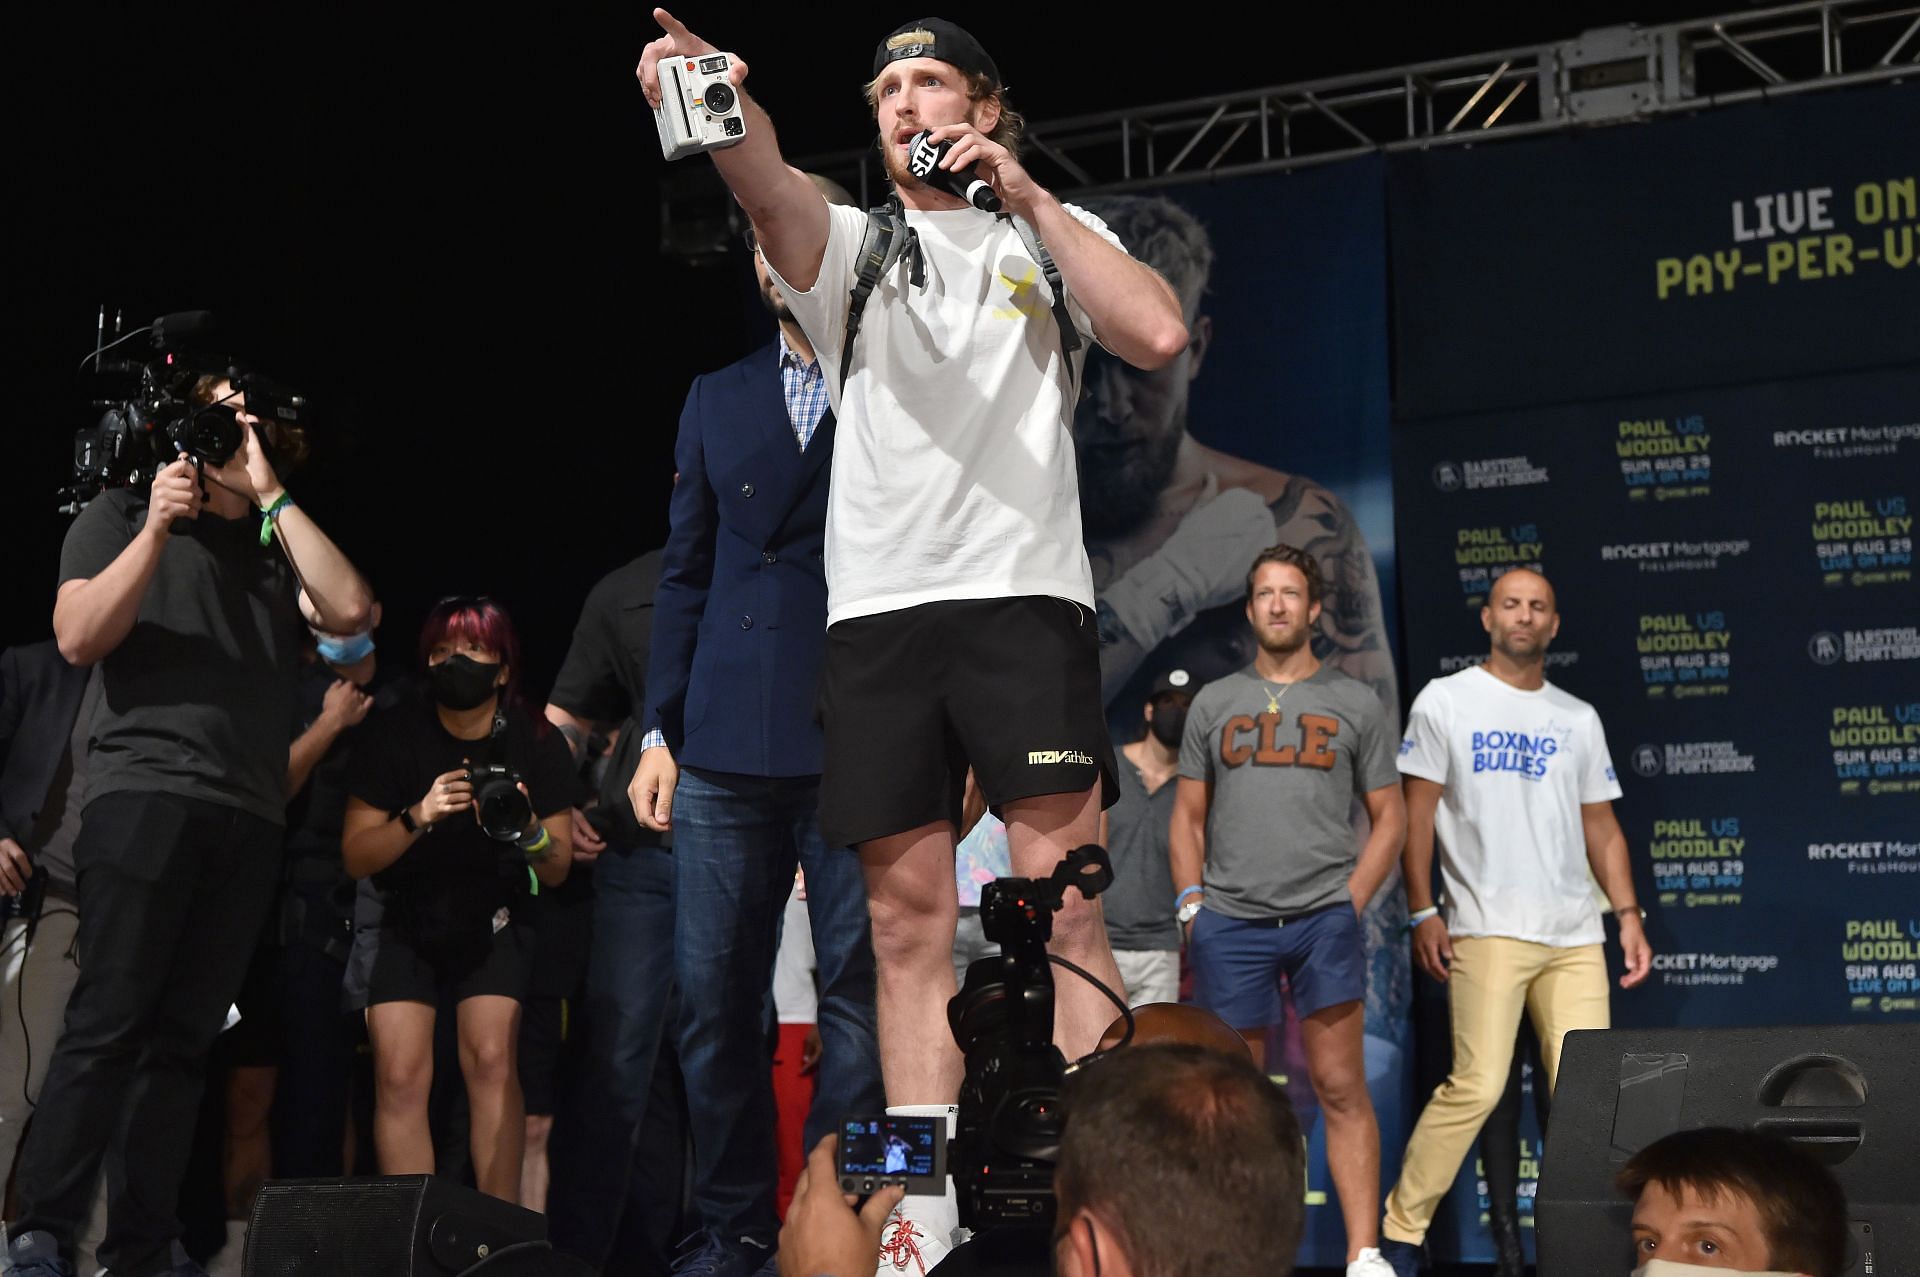 Logan Paul onstage at the Jake Paul v Tyron Woodley weigh In